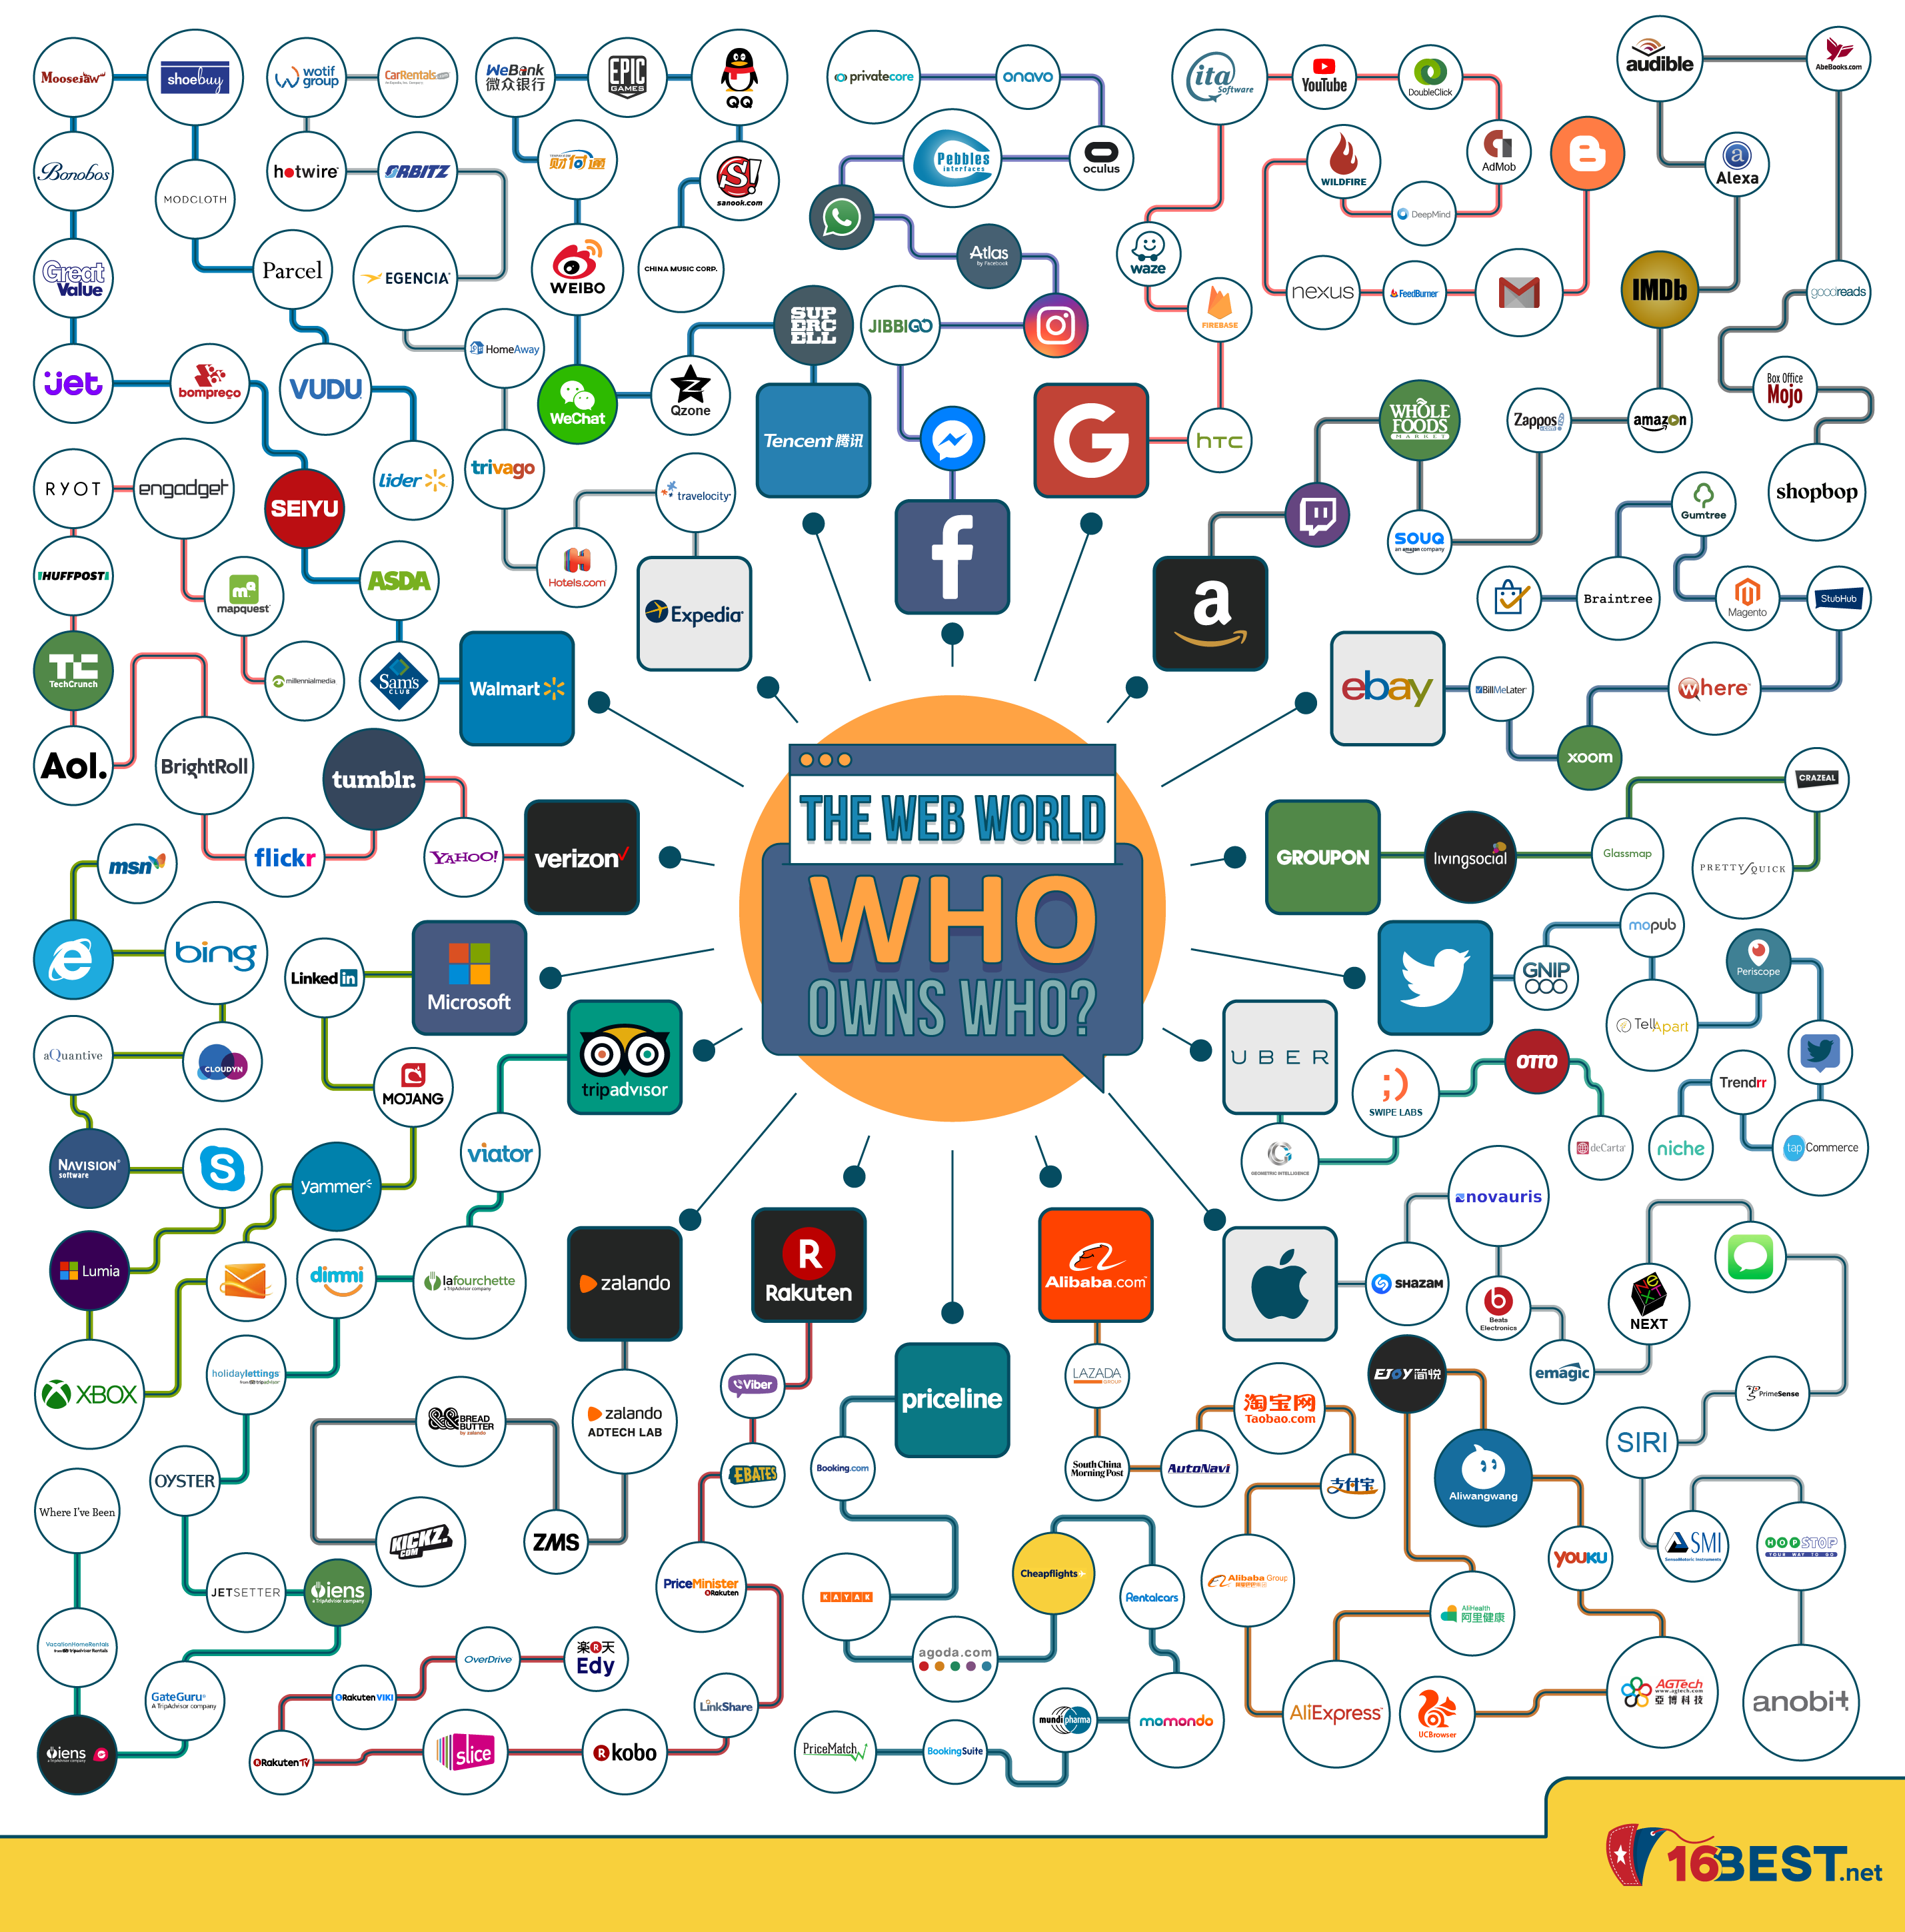 The Web World: Who Owns Who? (Infographic)